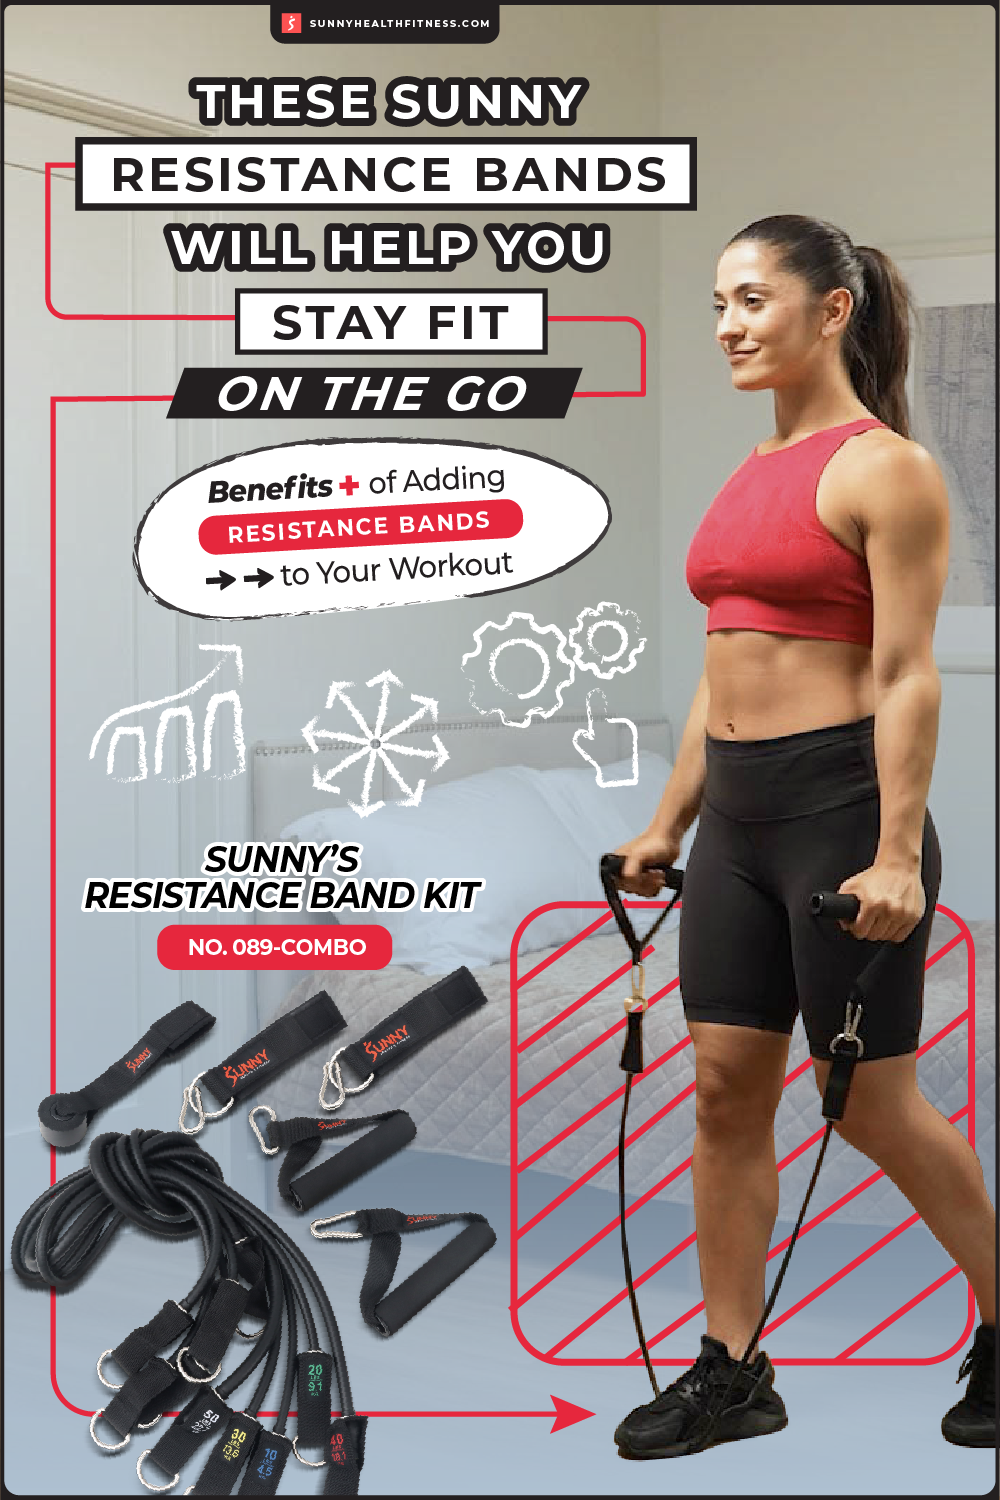 Resistance Bands Will Help You Stay Fit on the Go Infographic